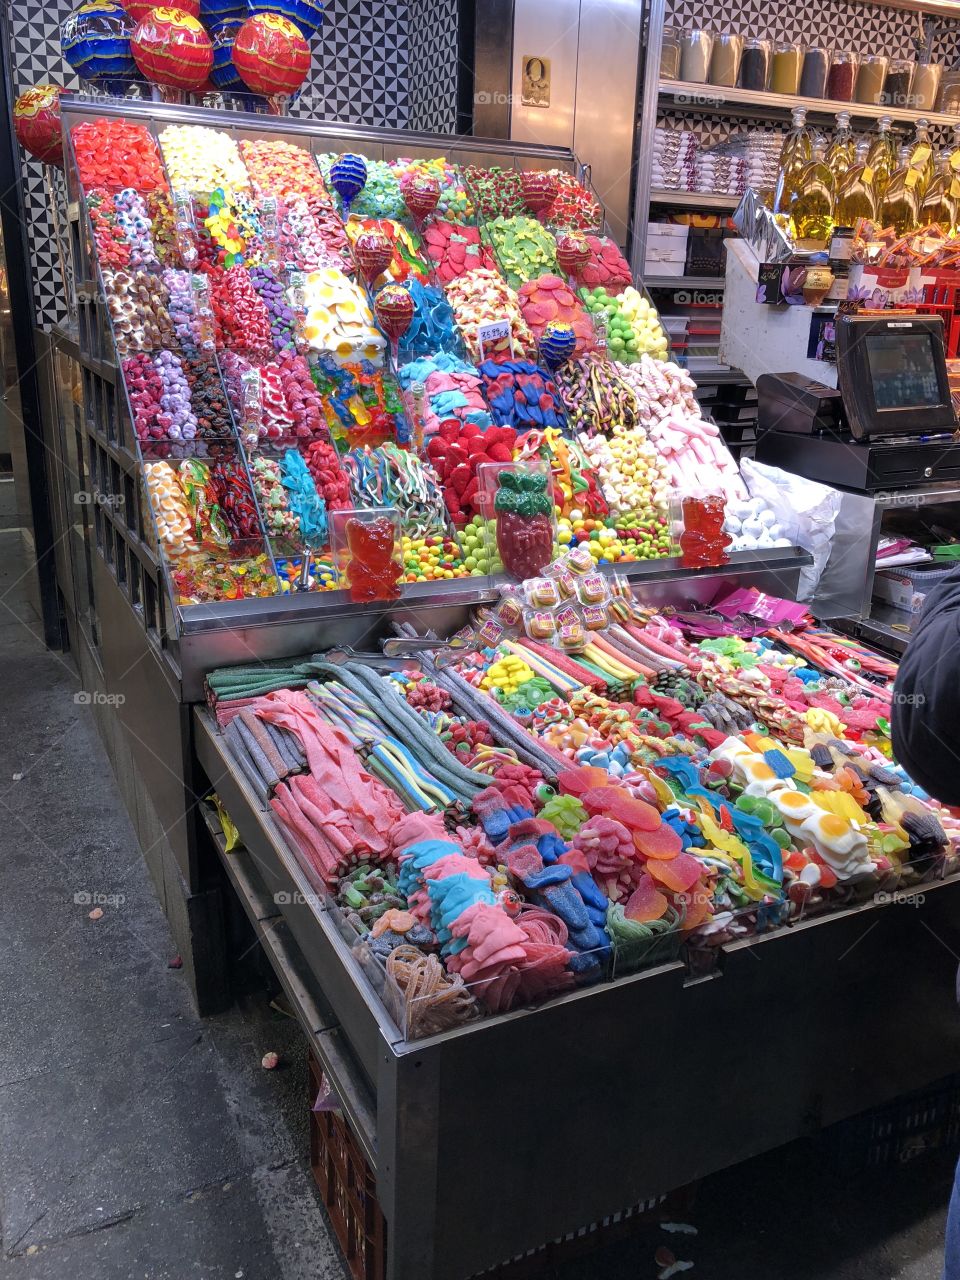 A colorful, inviting sweet candy stand in a bustling central market in a European city.